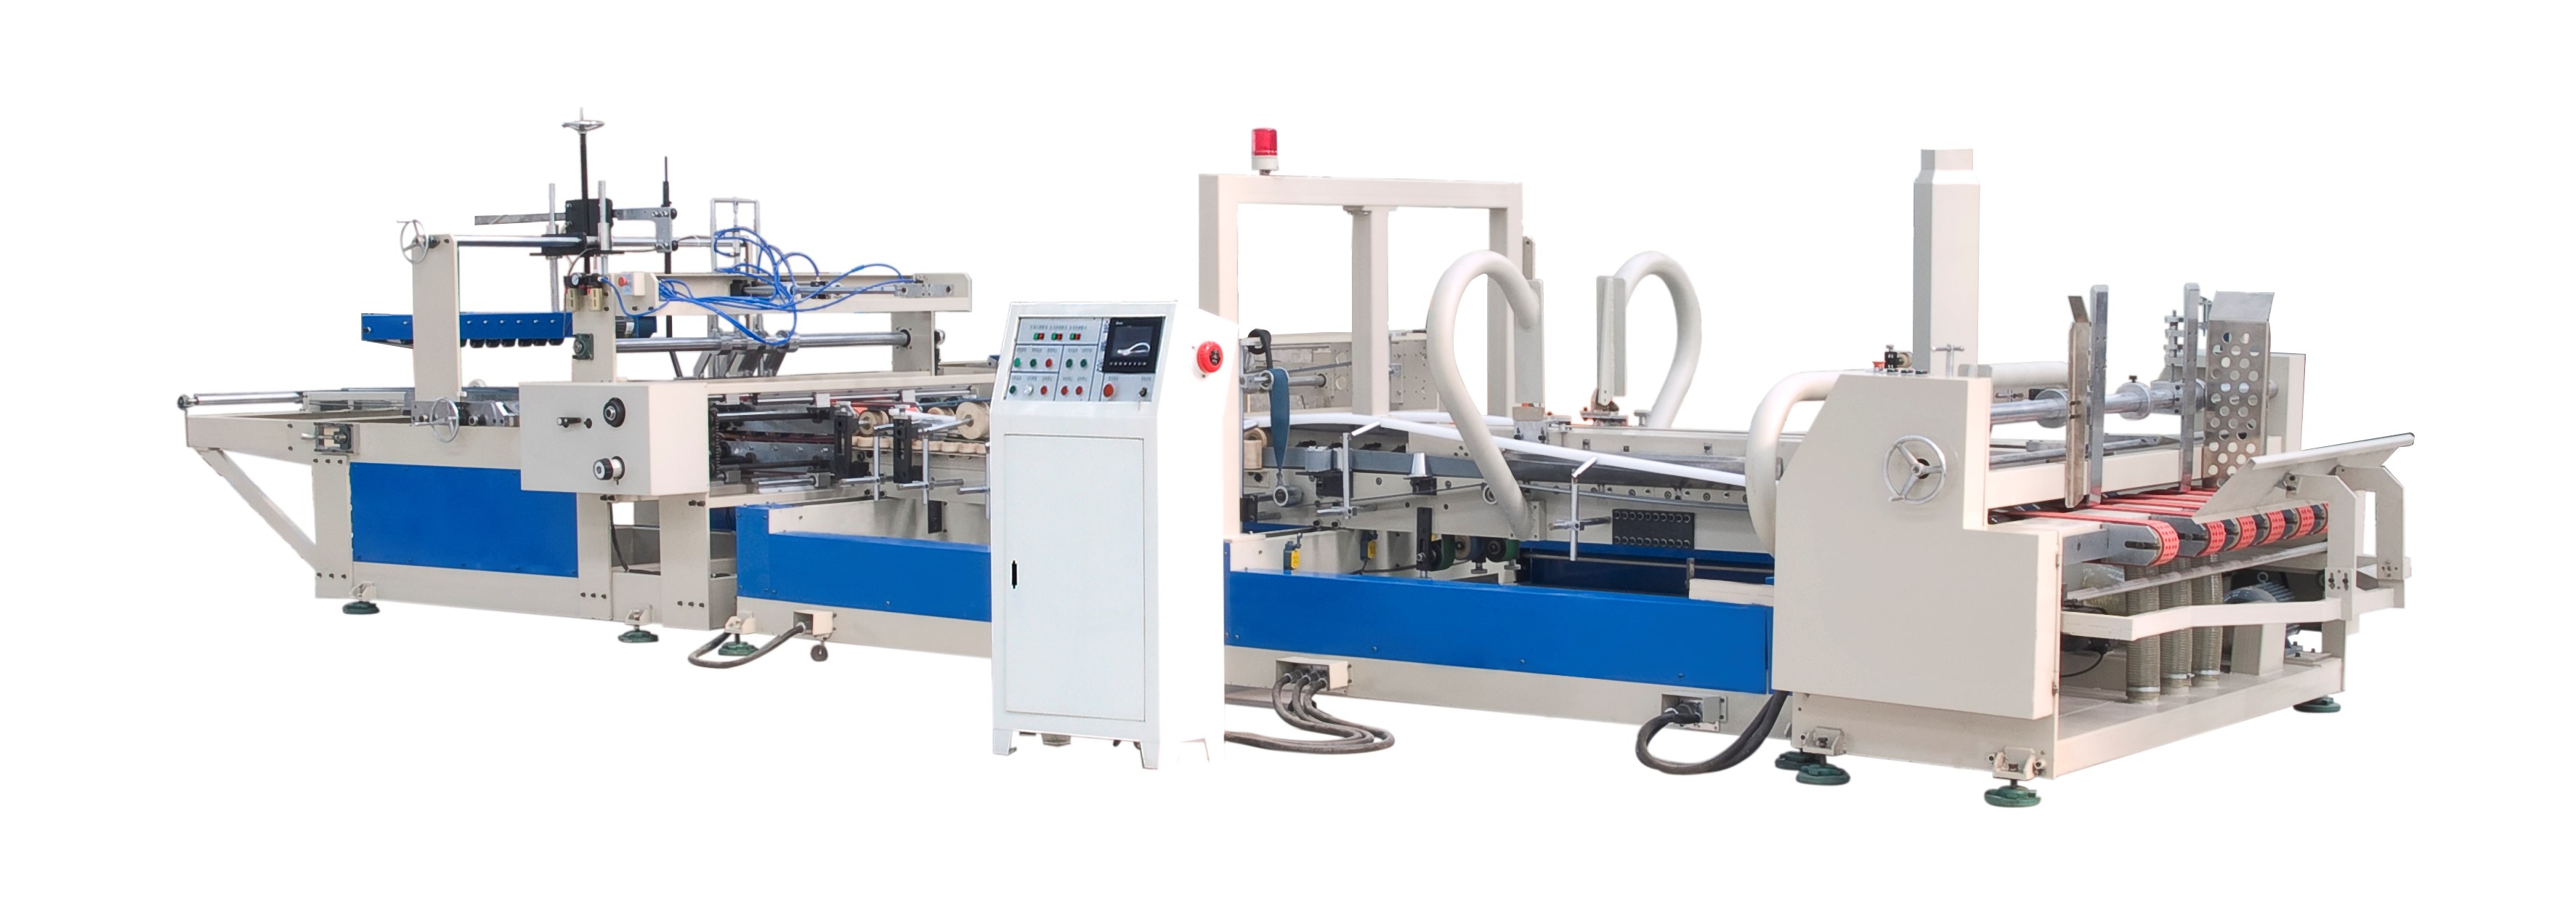 KINGVIDA JHX Series Automatic Folder Gluer (Only for Corrugated Cartons, One Point)